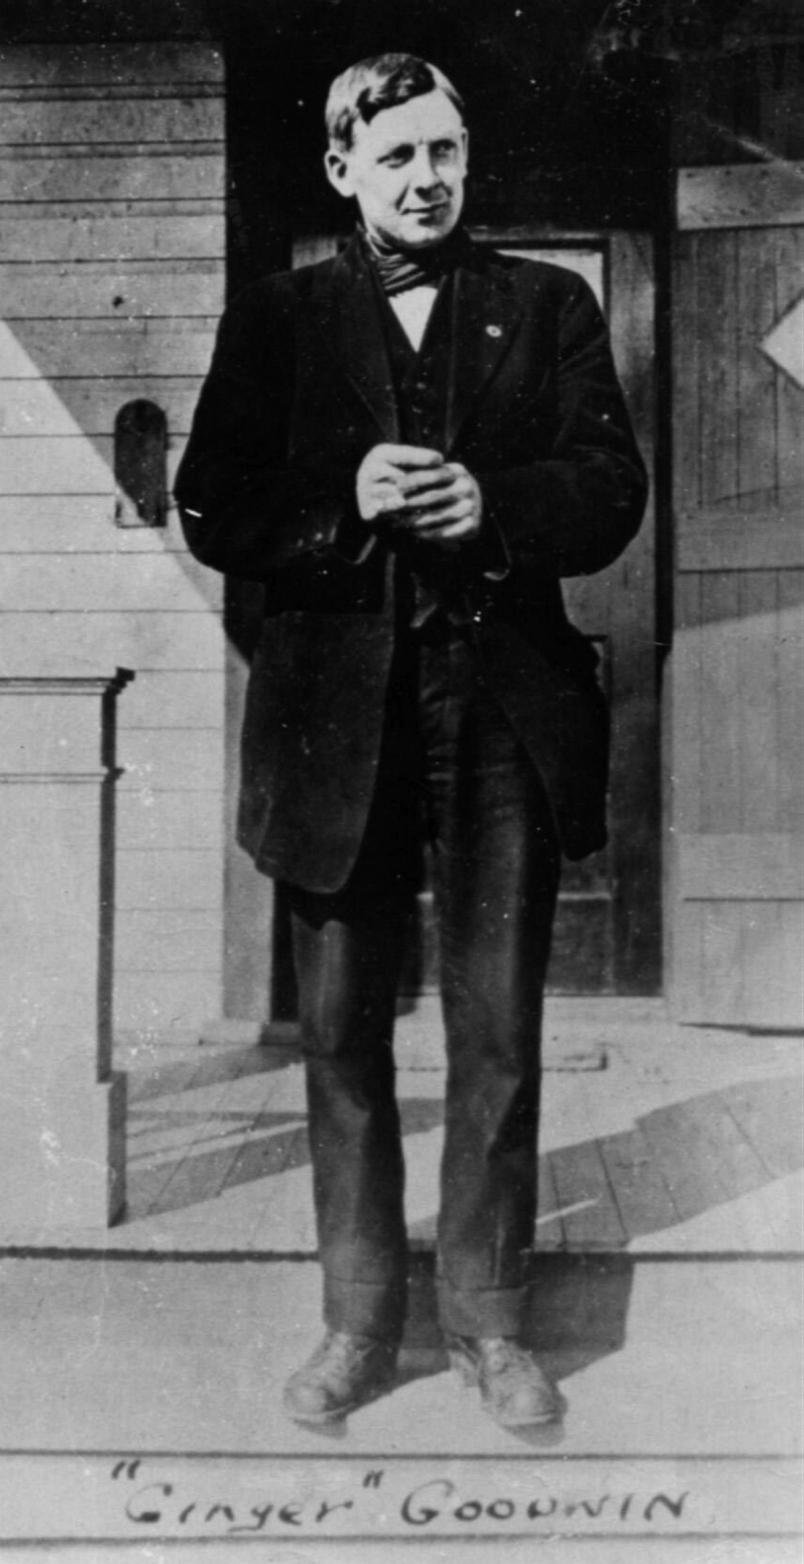 Ginger Goodwin standing with hands clasped in an undated photo.
